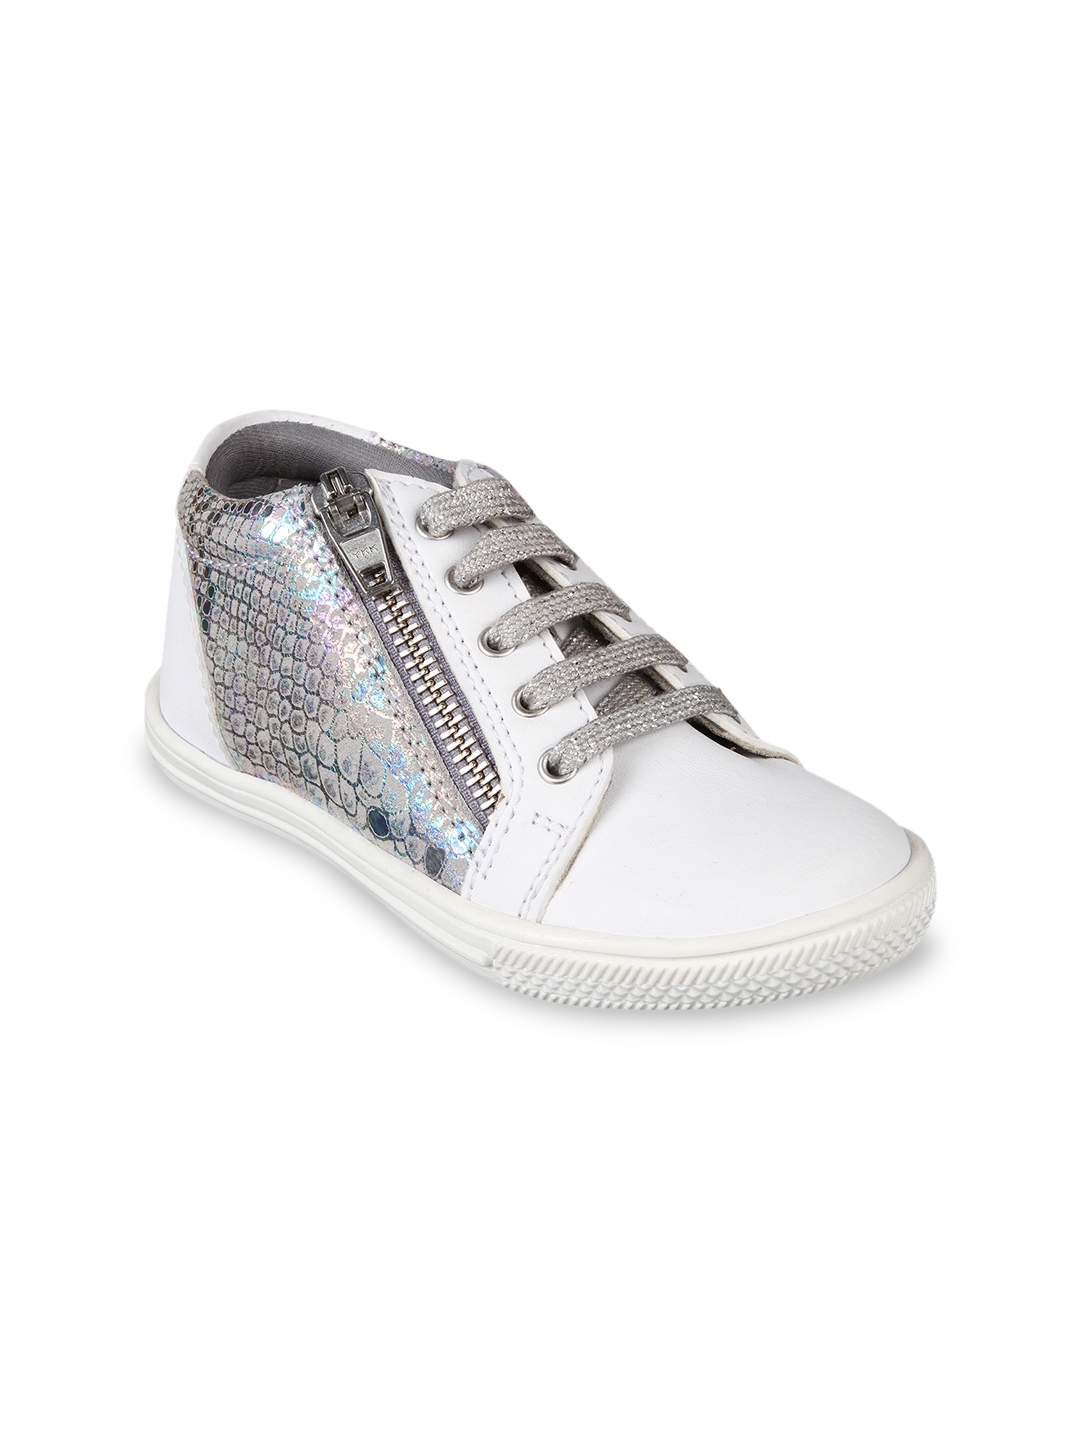 Buy Beanz Boys White Leather Sneakers 